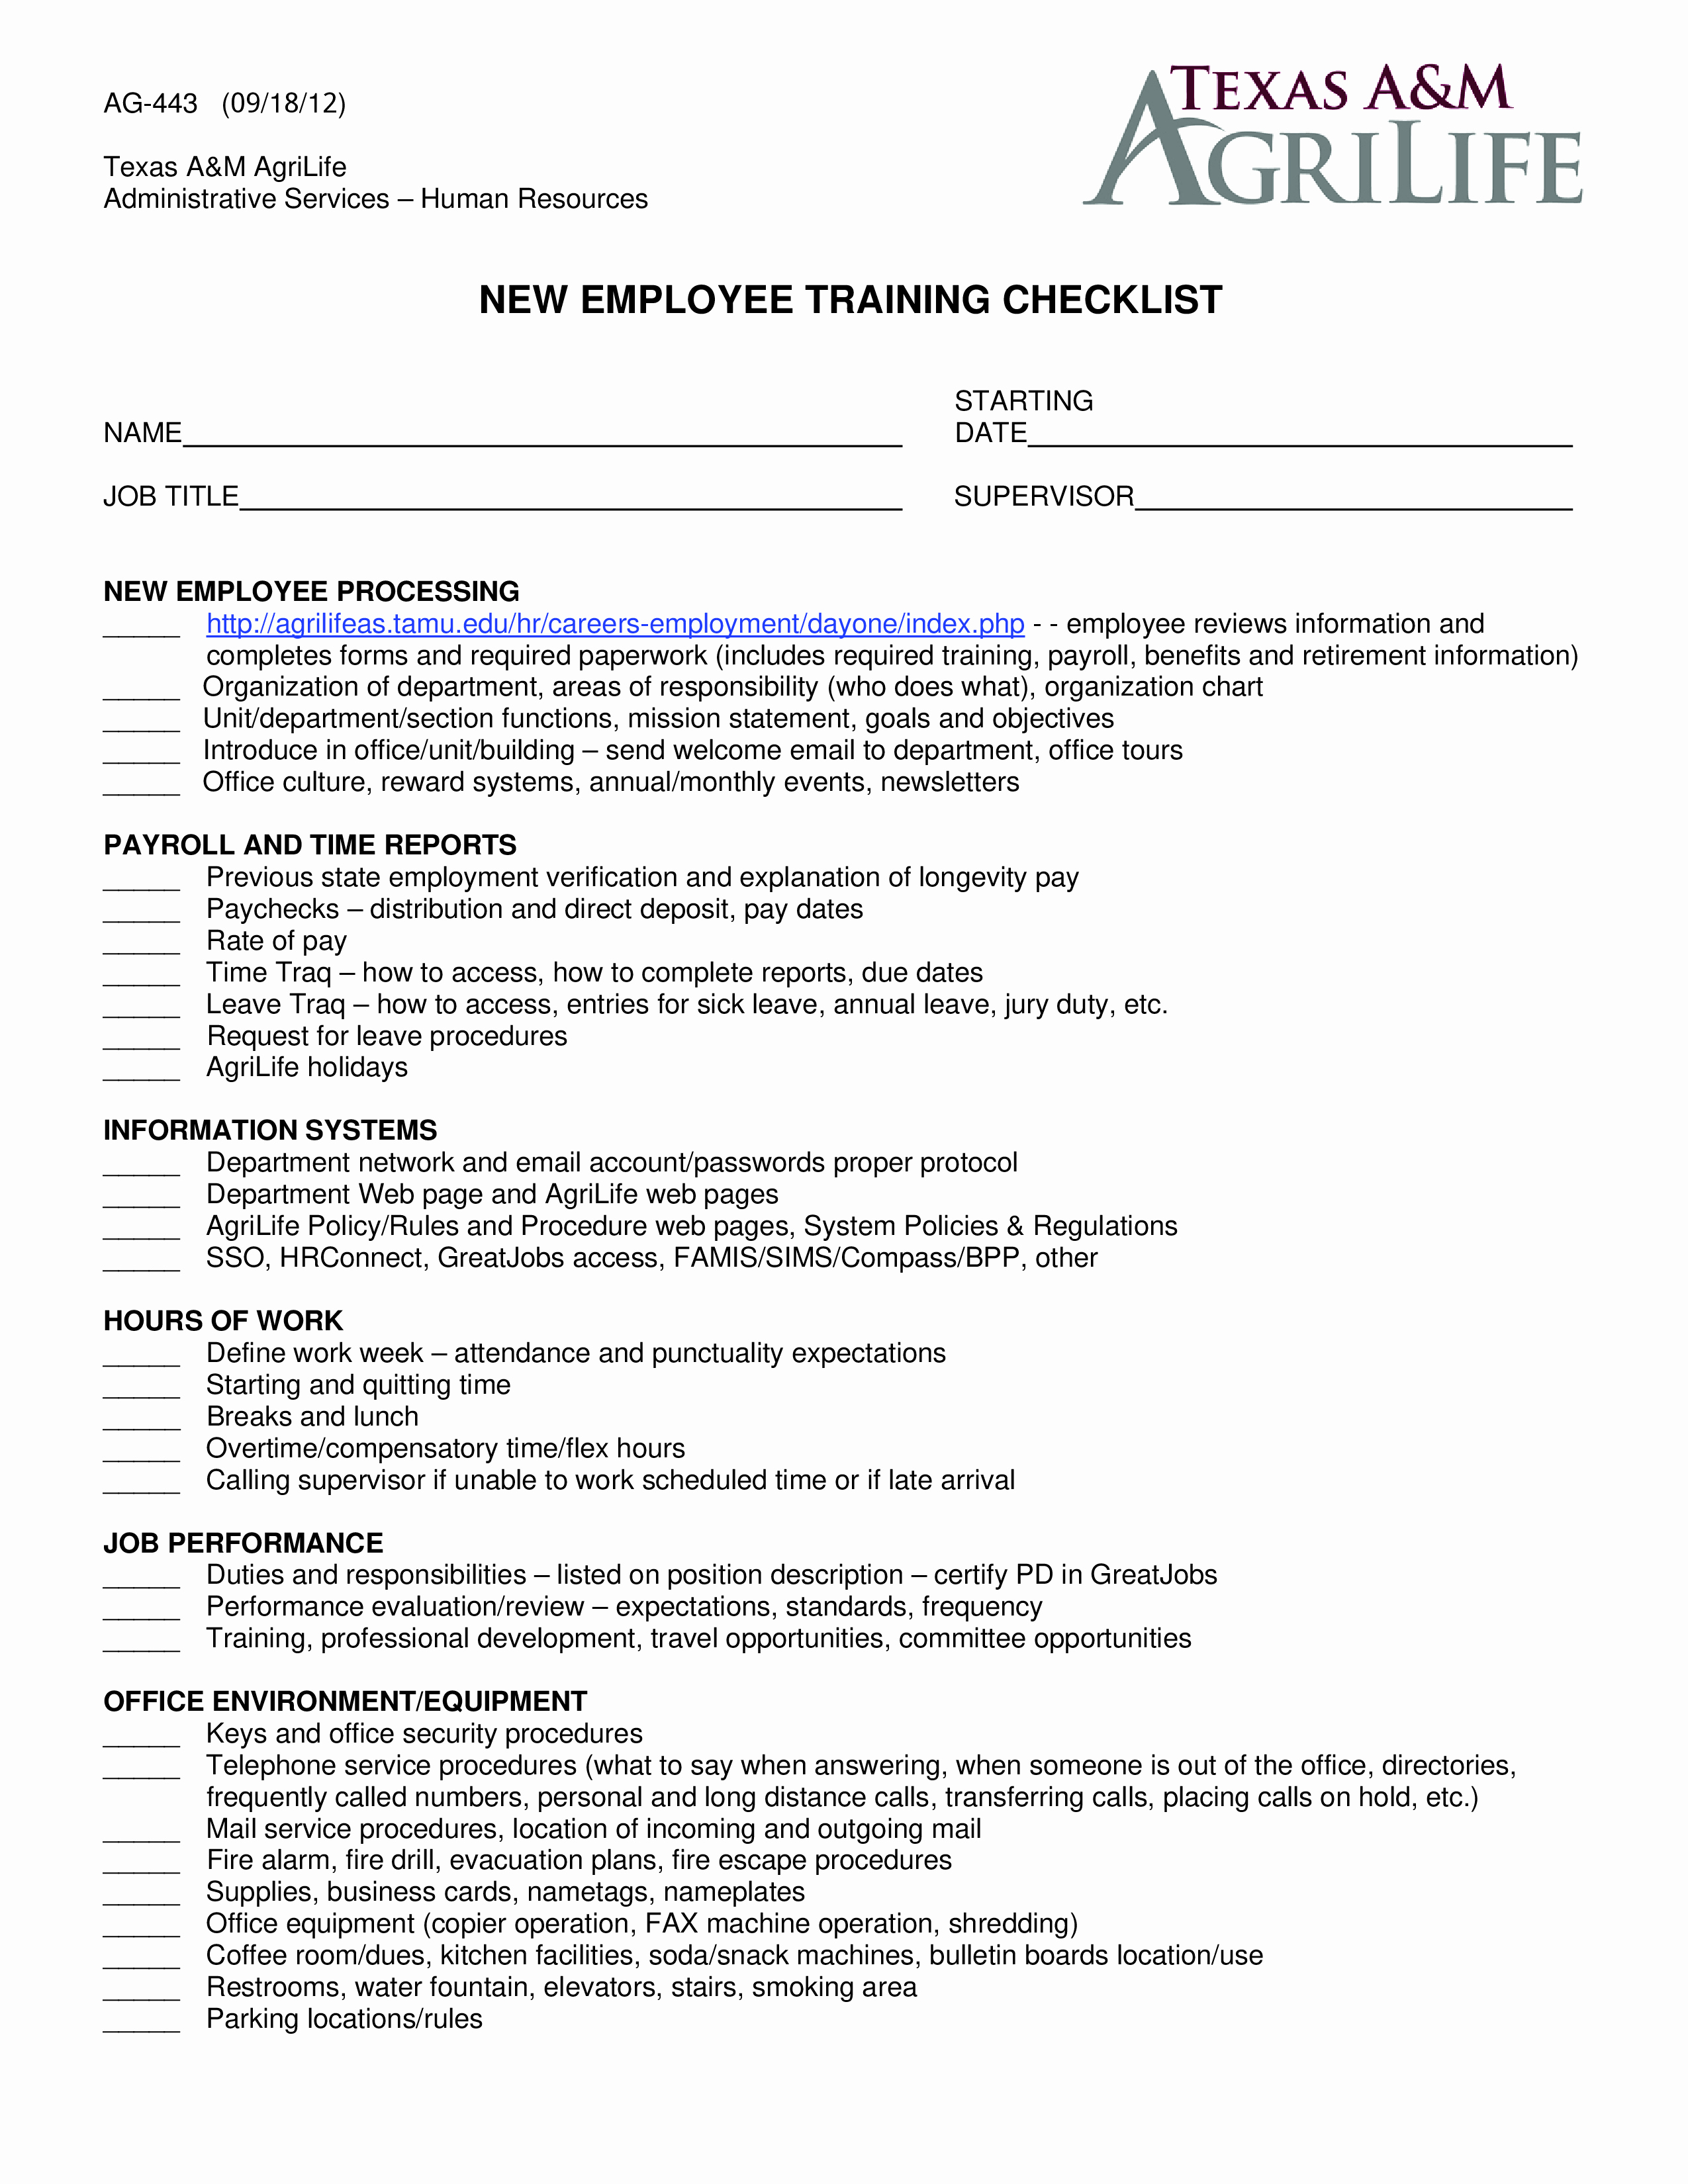 Employee Training Checklist Template Awesome 12 13 Retirement Checklist Template